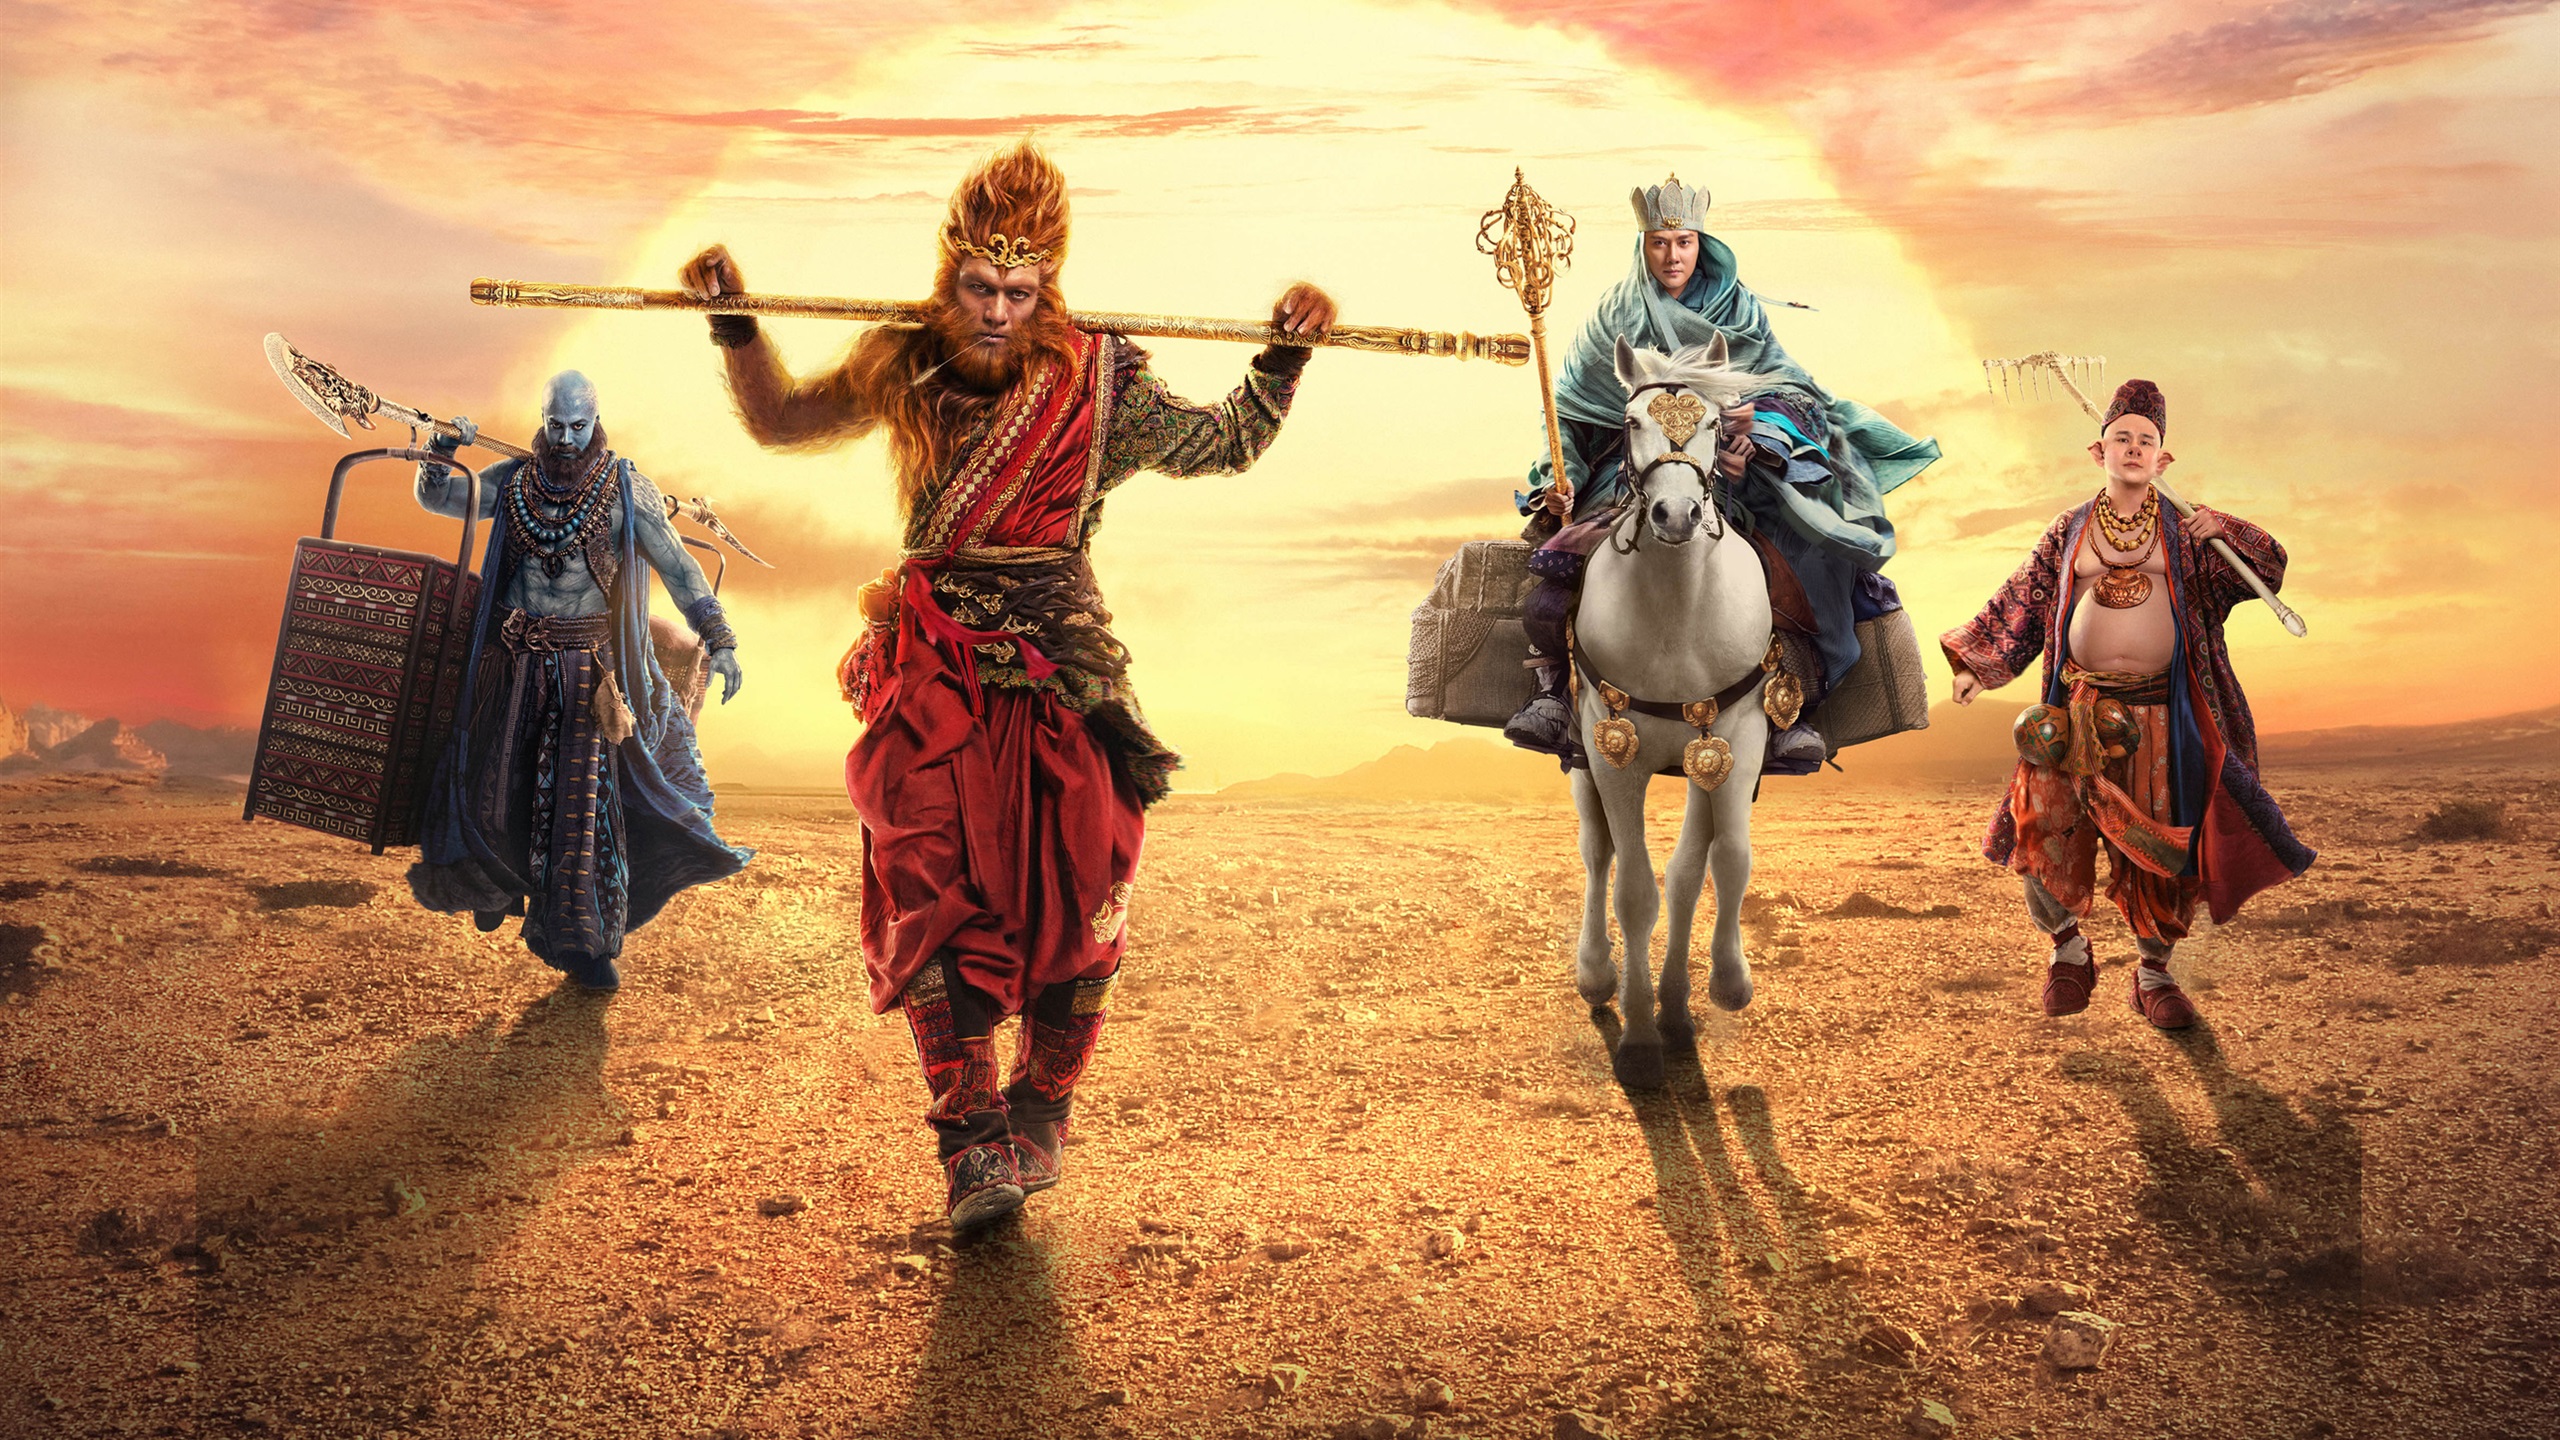 Movie The Monkey King 2 HD Wallpaper | Background Image